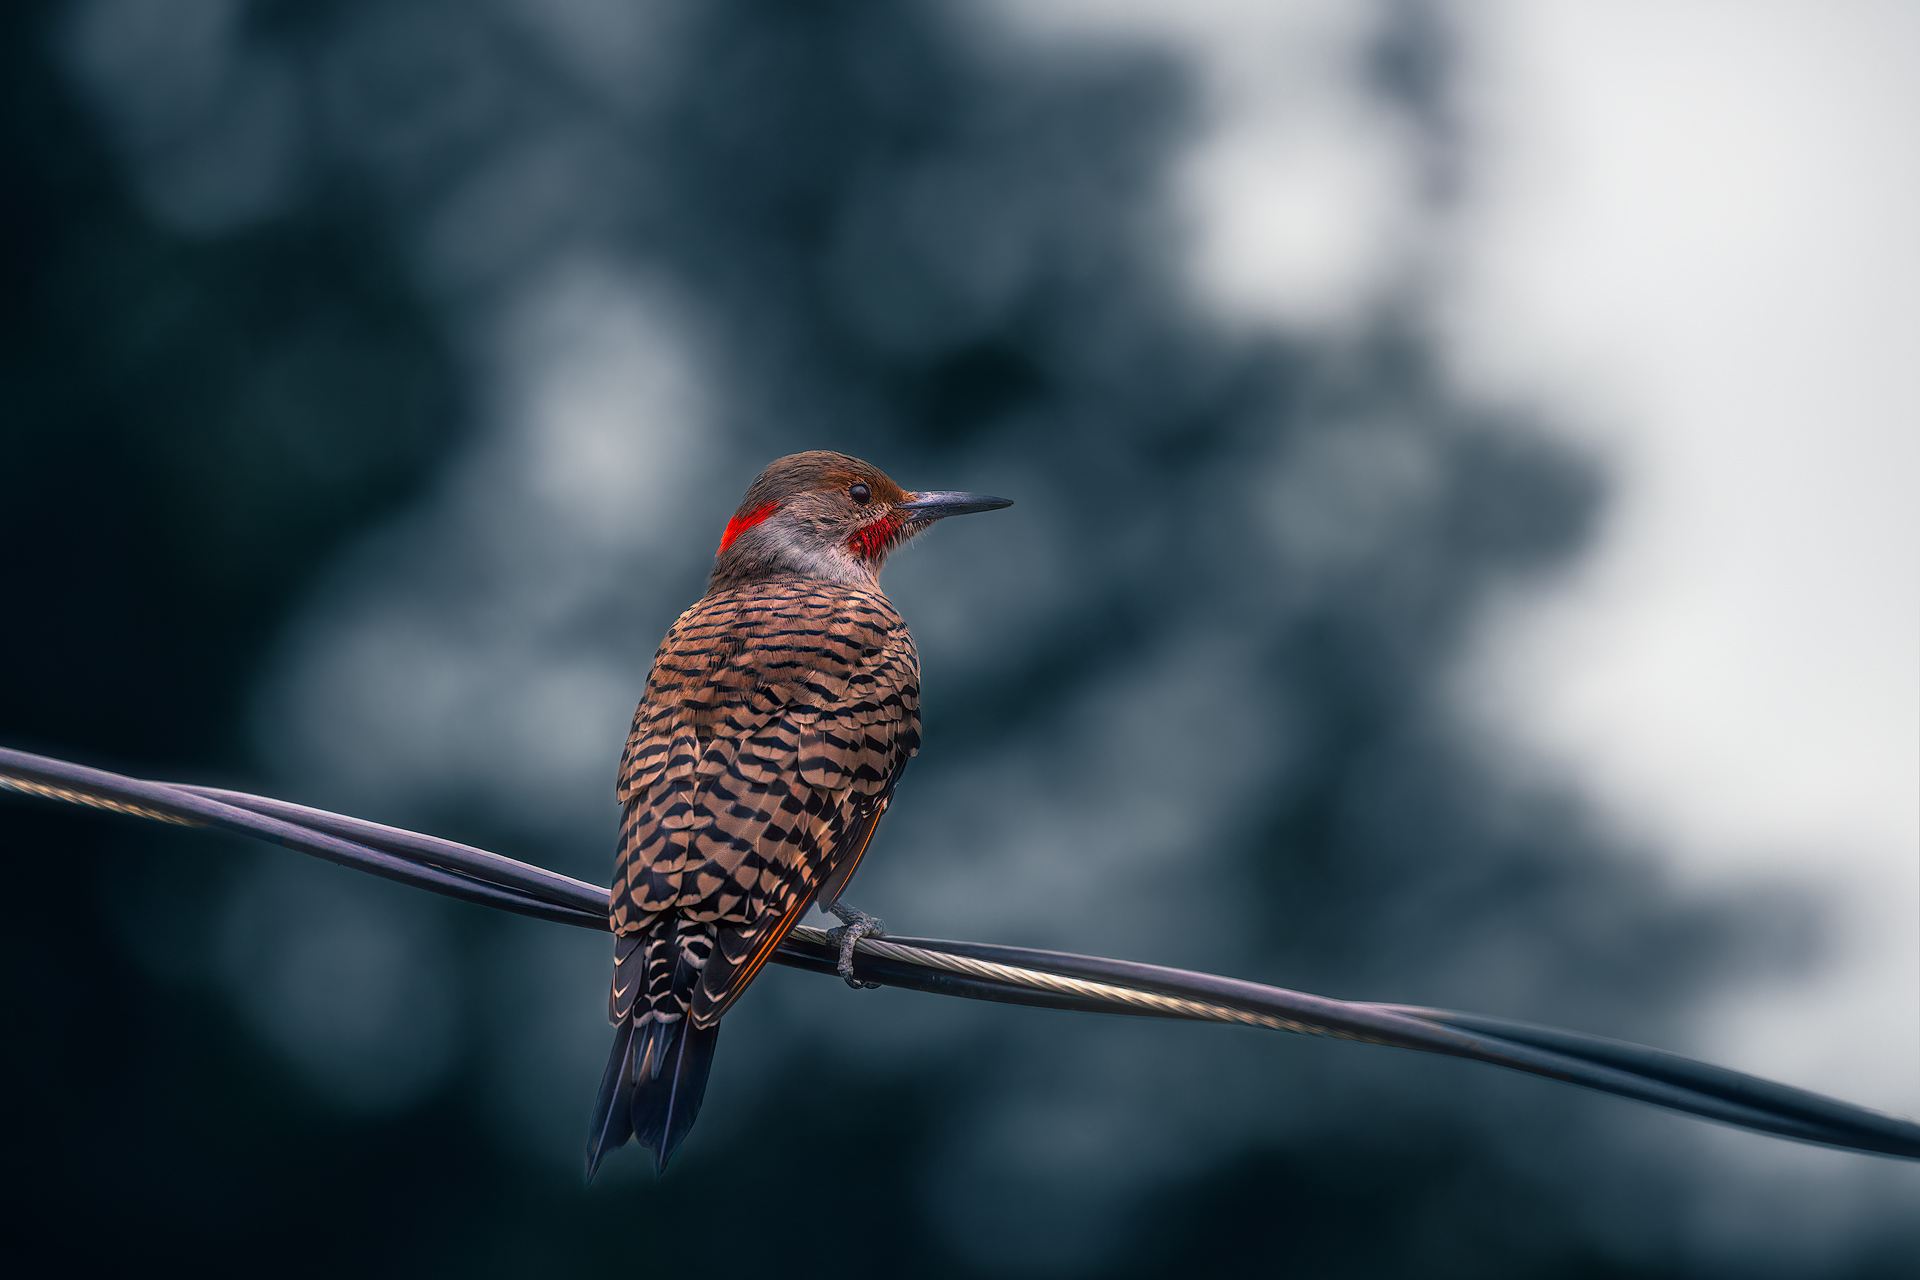 BIRD,NORTHERN,FLICKER,WILDLIFE,ANIMAL,NATURE,SKY,CLOUD,CITY,DETAIL,FEATHER,PORTRAIT,COLD, Zhao Huapu